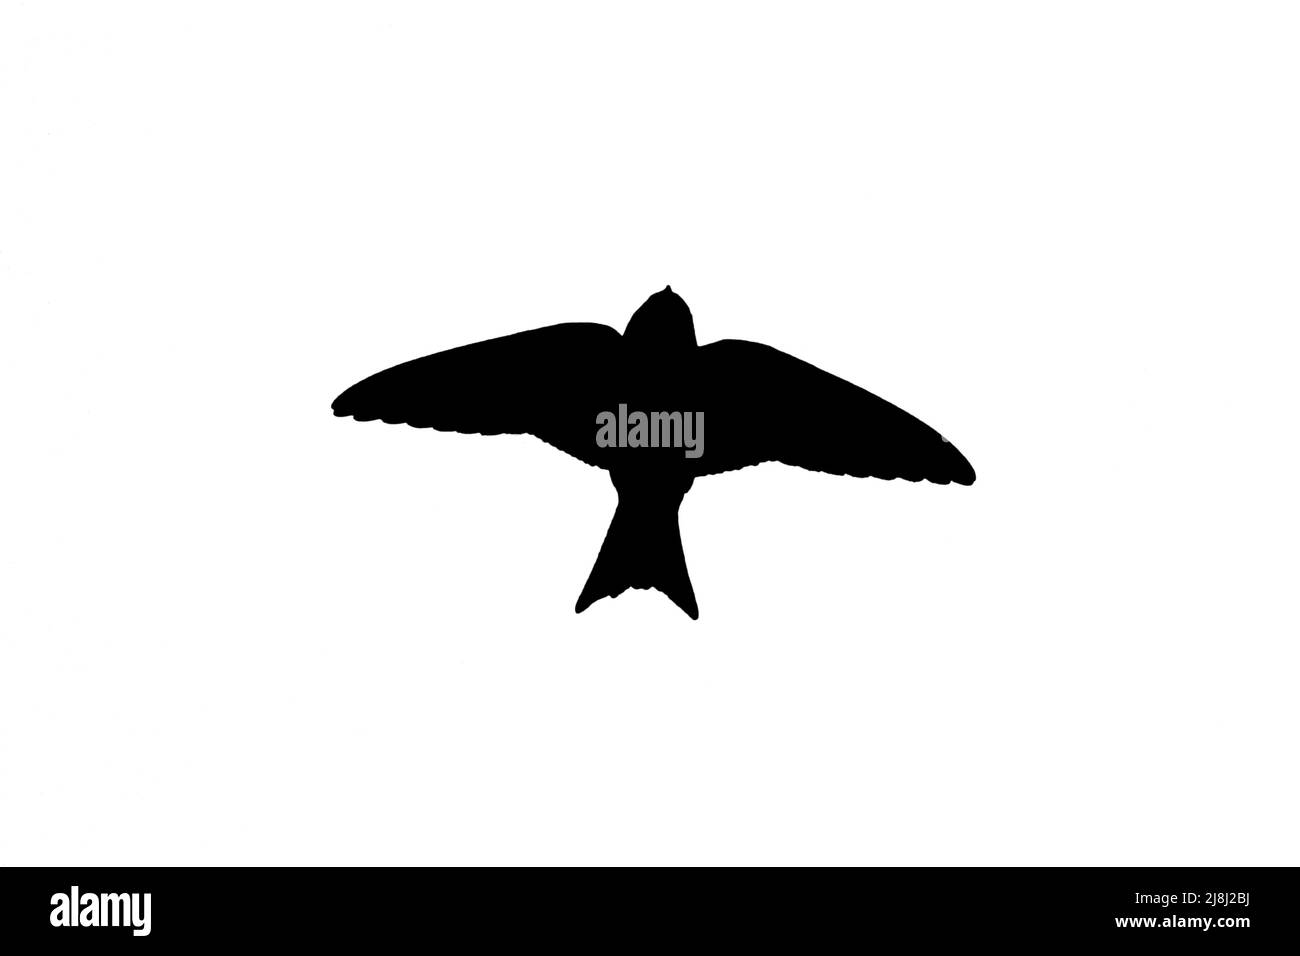 Silhouette of common house martin (Delichon urbicum) in flight outlined against white background to show wings, head and tail shapes Stock Photo